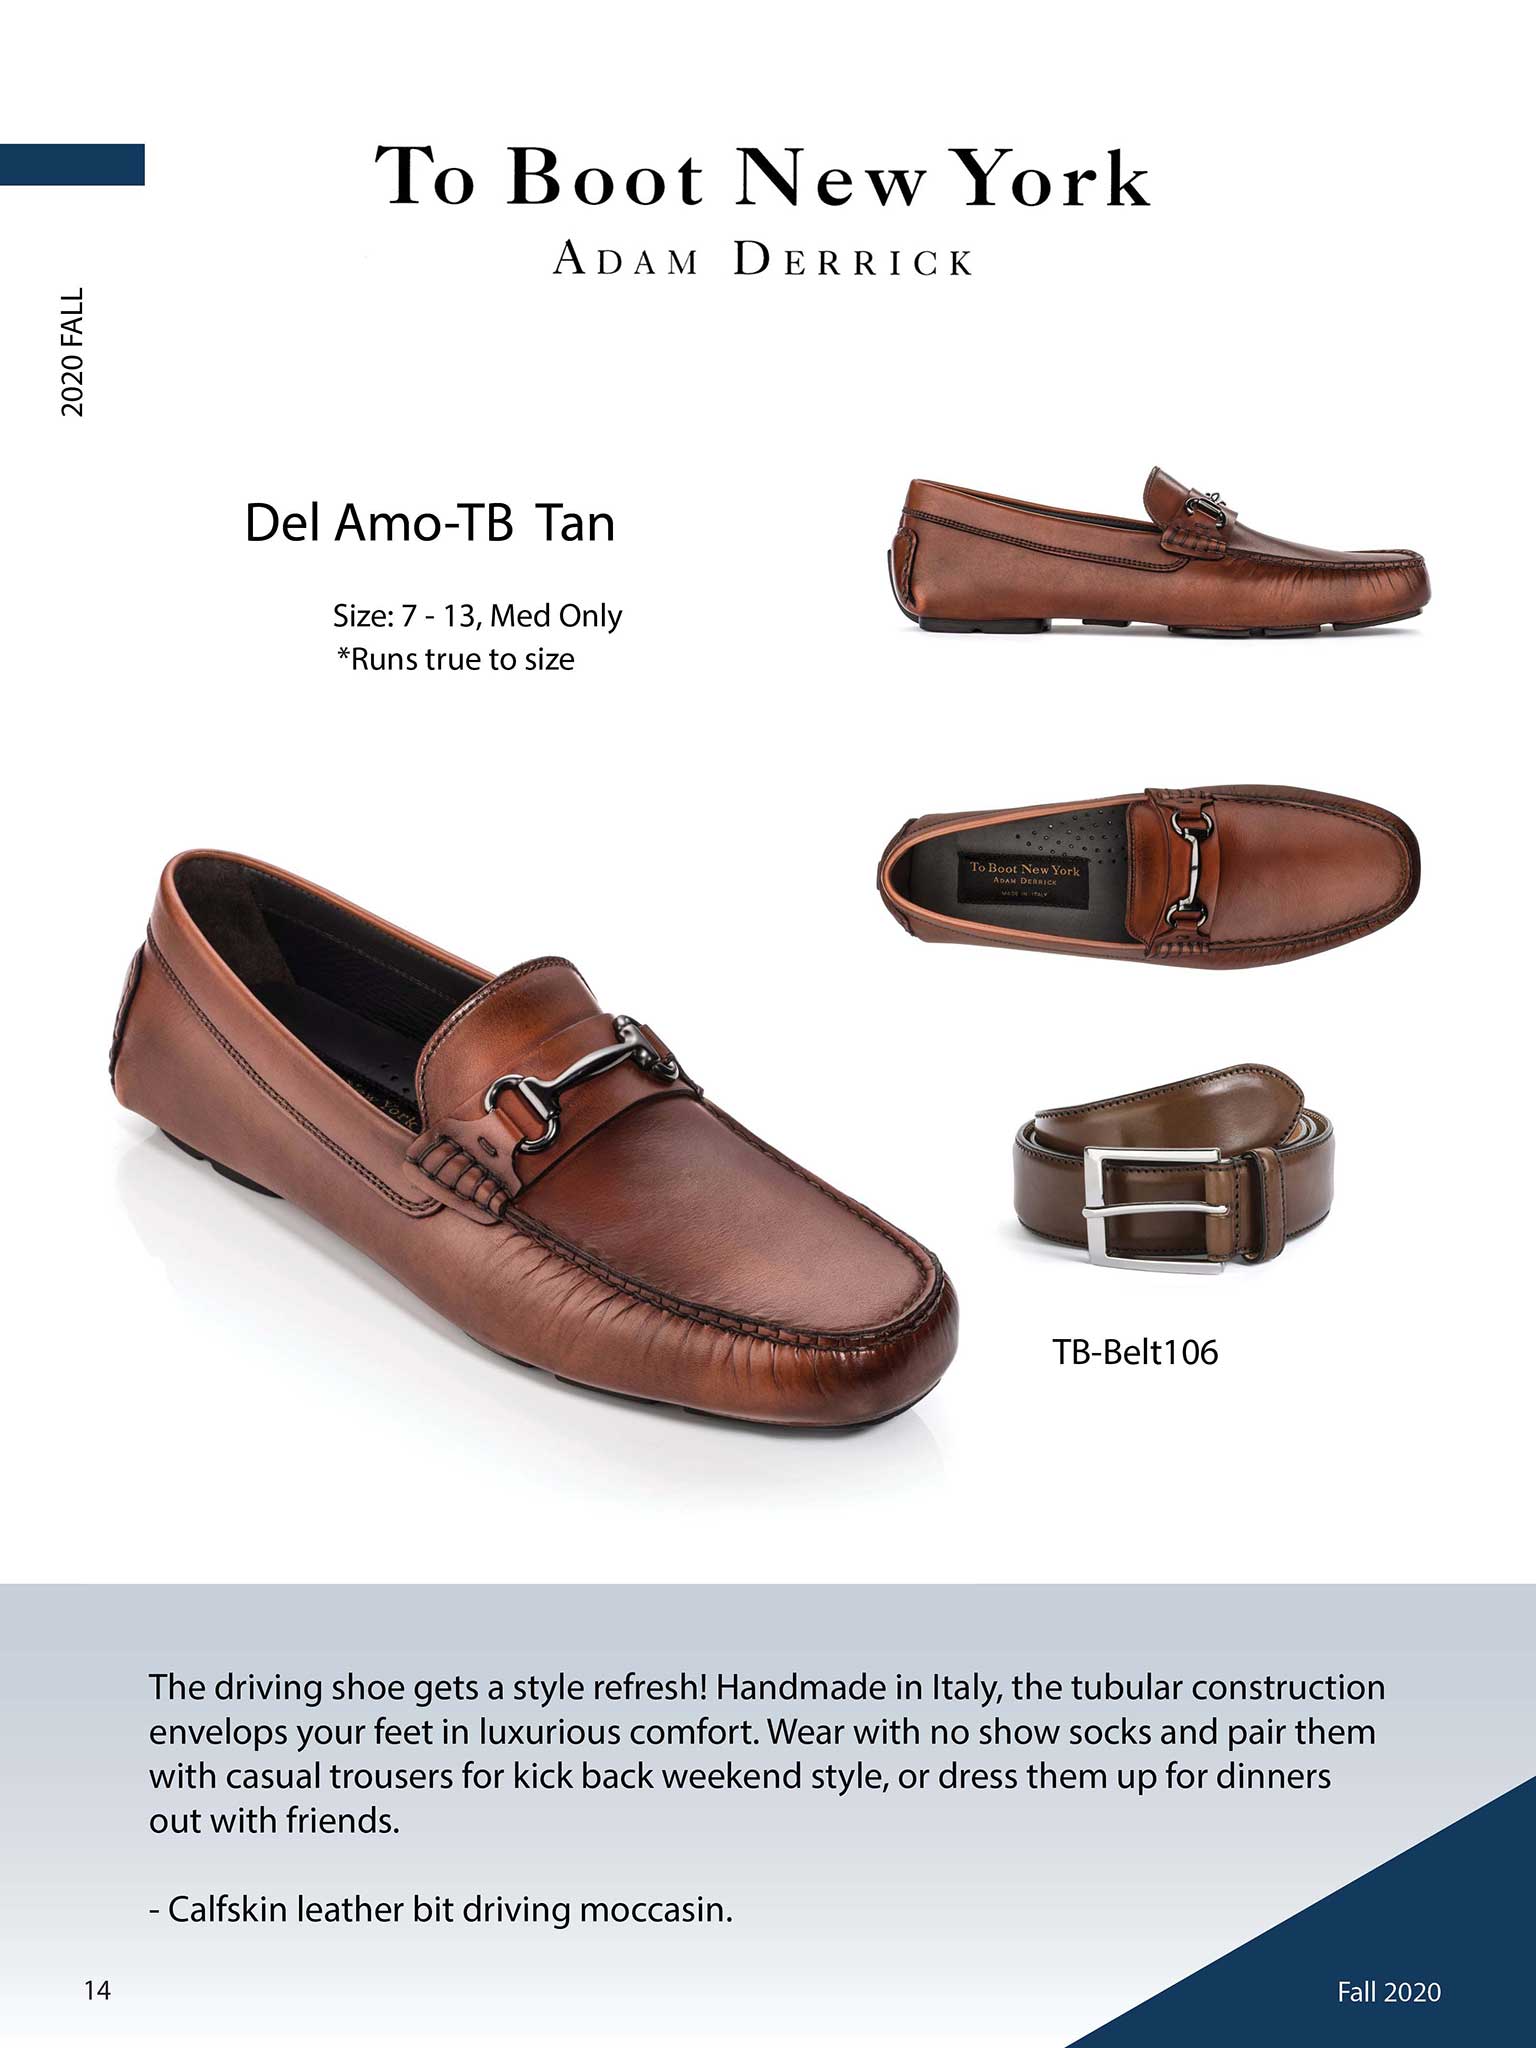 To Boot New York                                                                                                                                                                                                                                          , Del Amo in Tan by To Boot New York